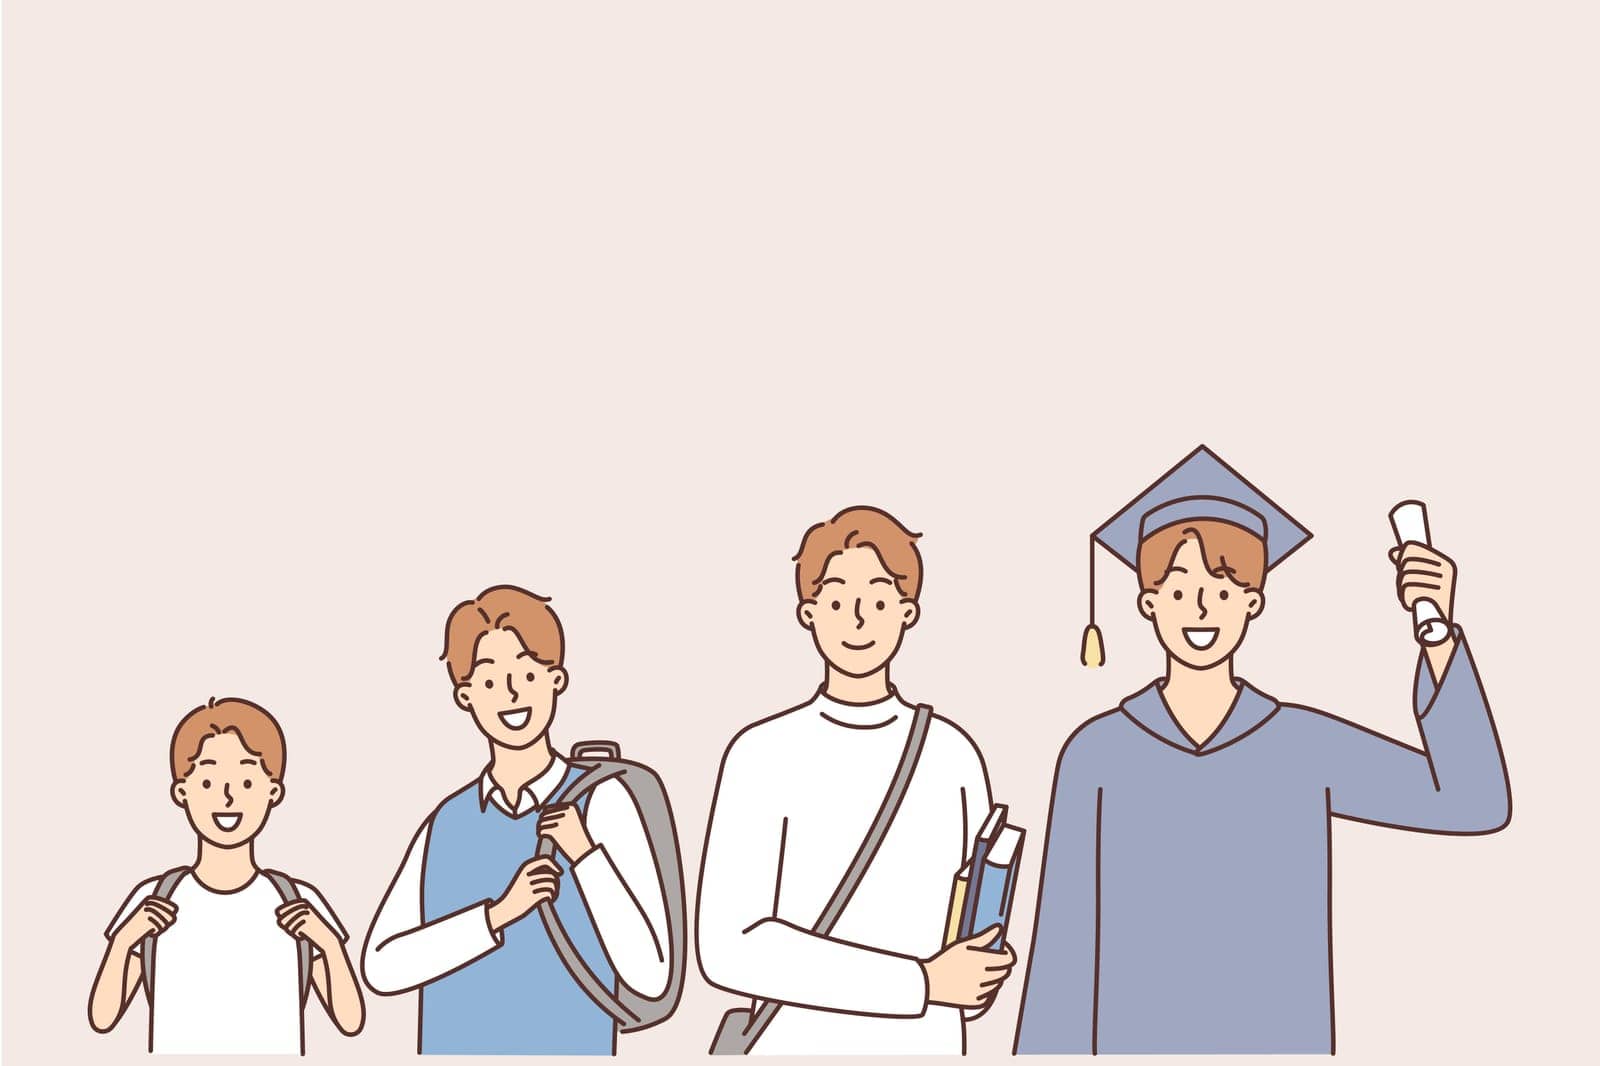 Characters of different ages - elementary school student, high school, college student, university student and graduate. Stages of growing up and growth of a student boy